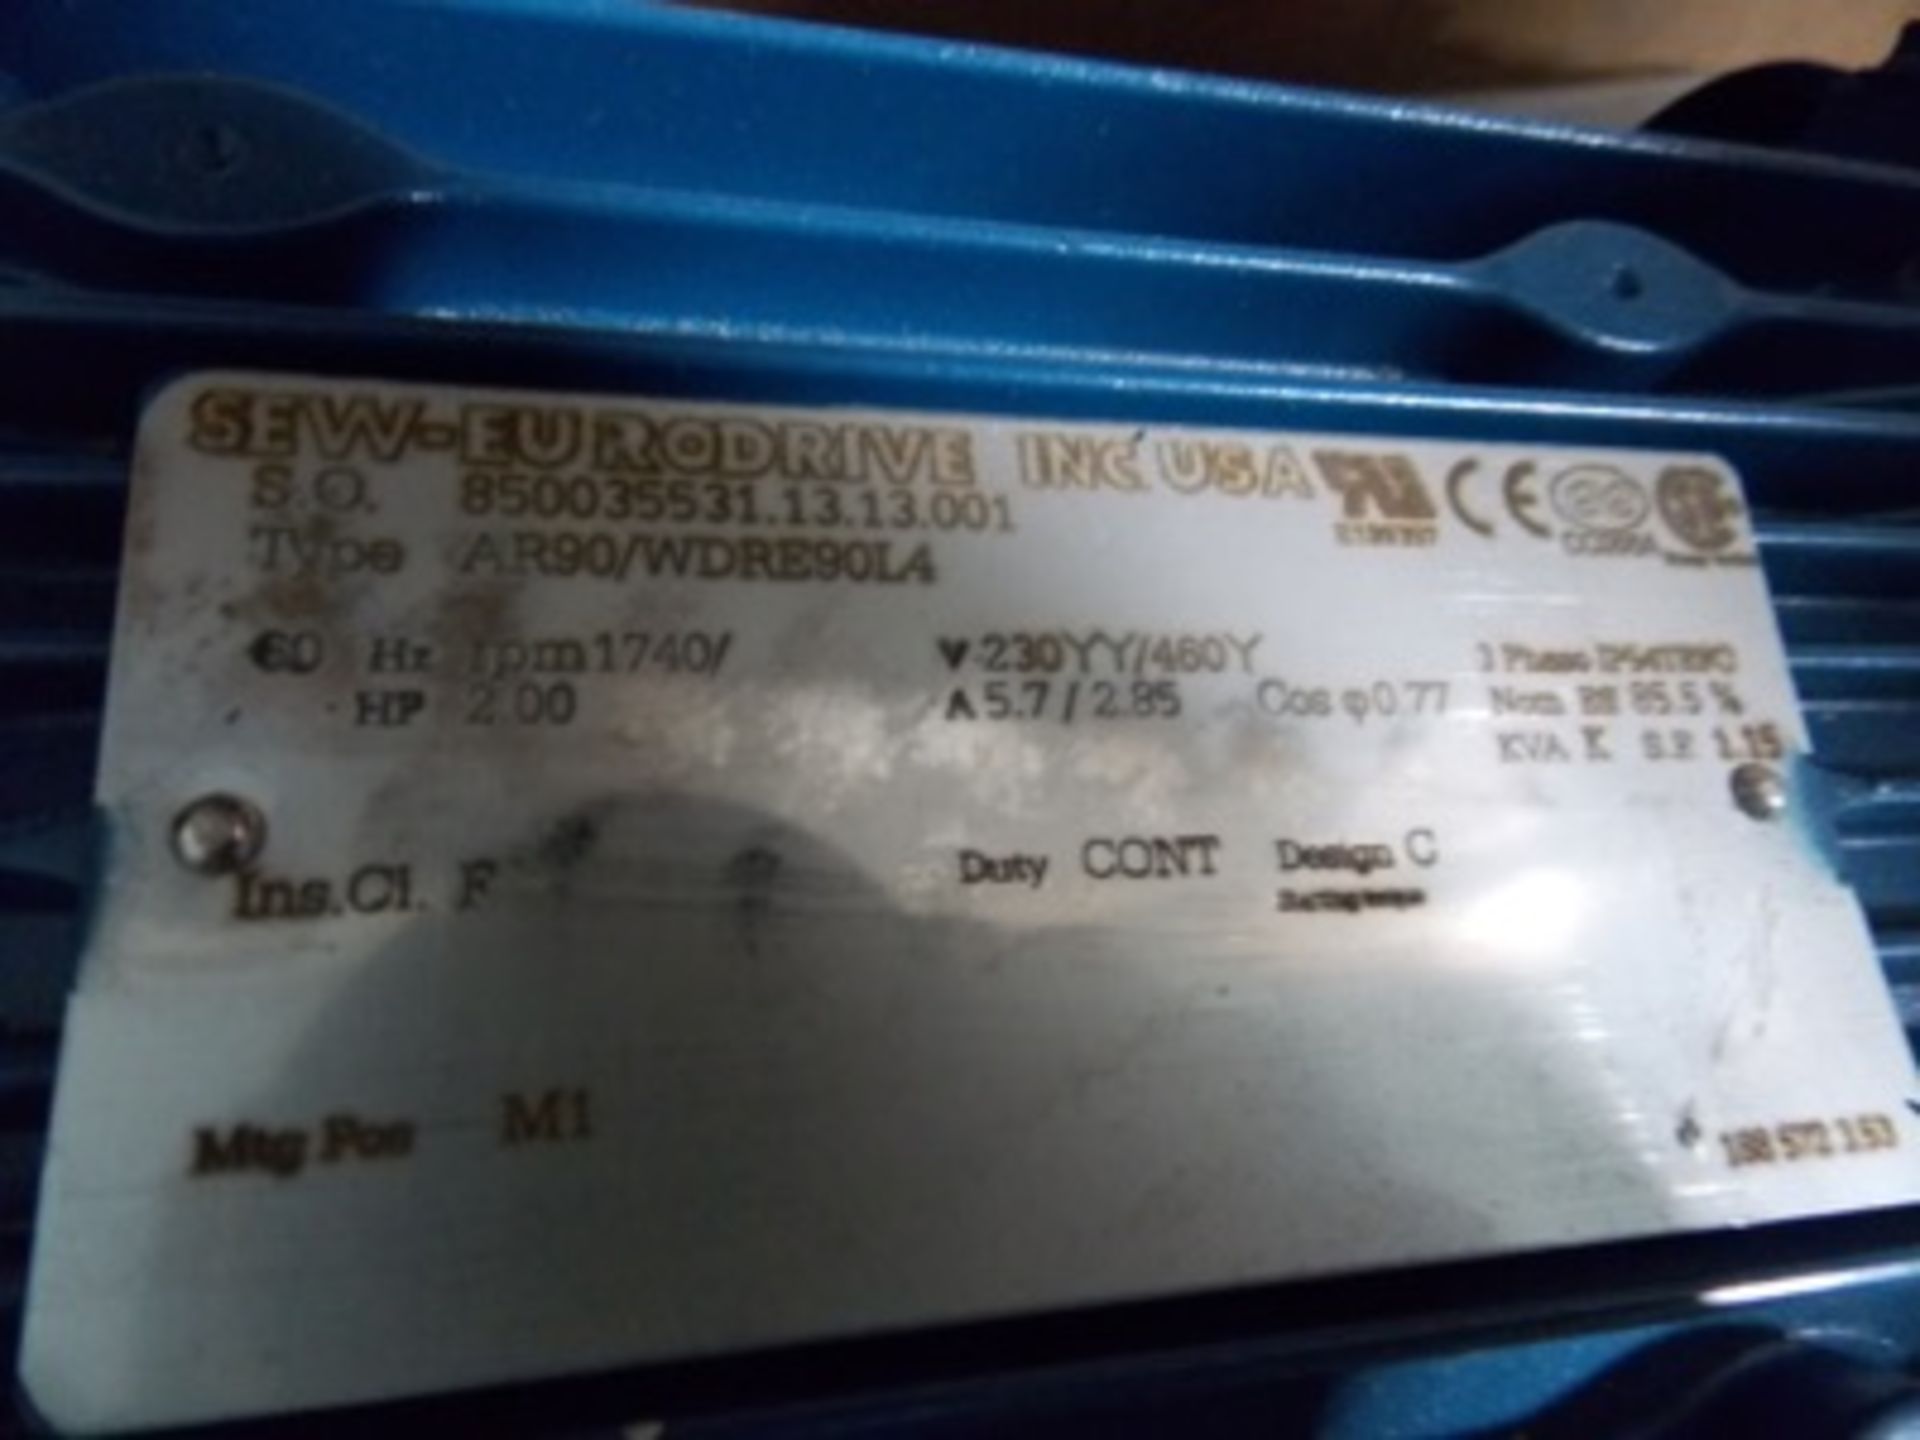 Sew Eurodrive Type AR90/WDRE9024, 2hp 230/460 Volts, (Unused) - Image 2 of 2